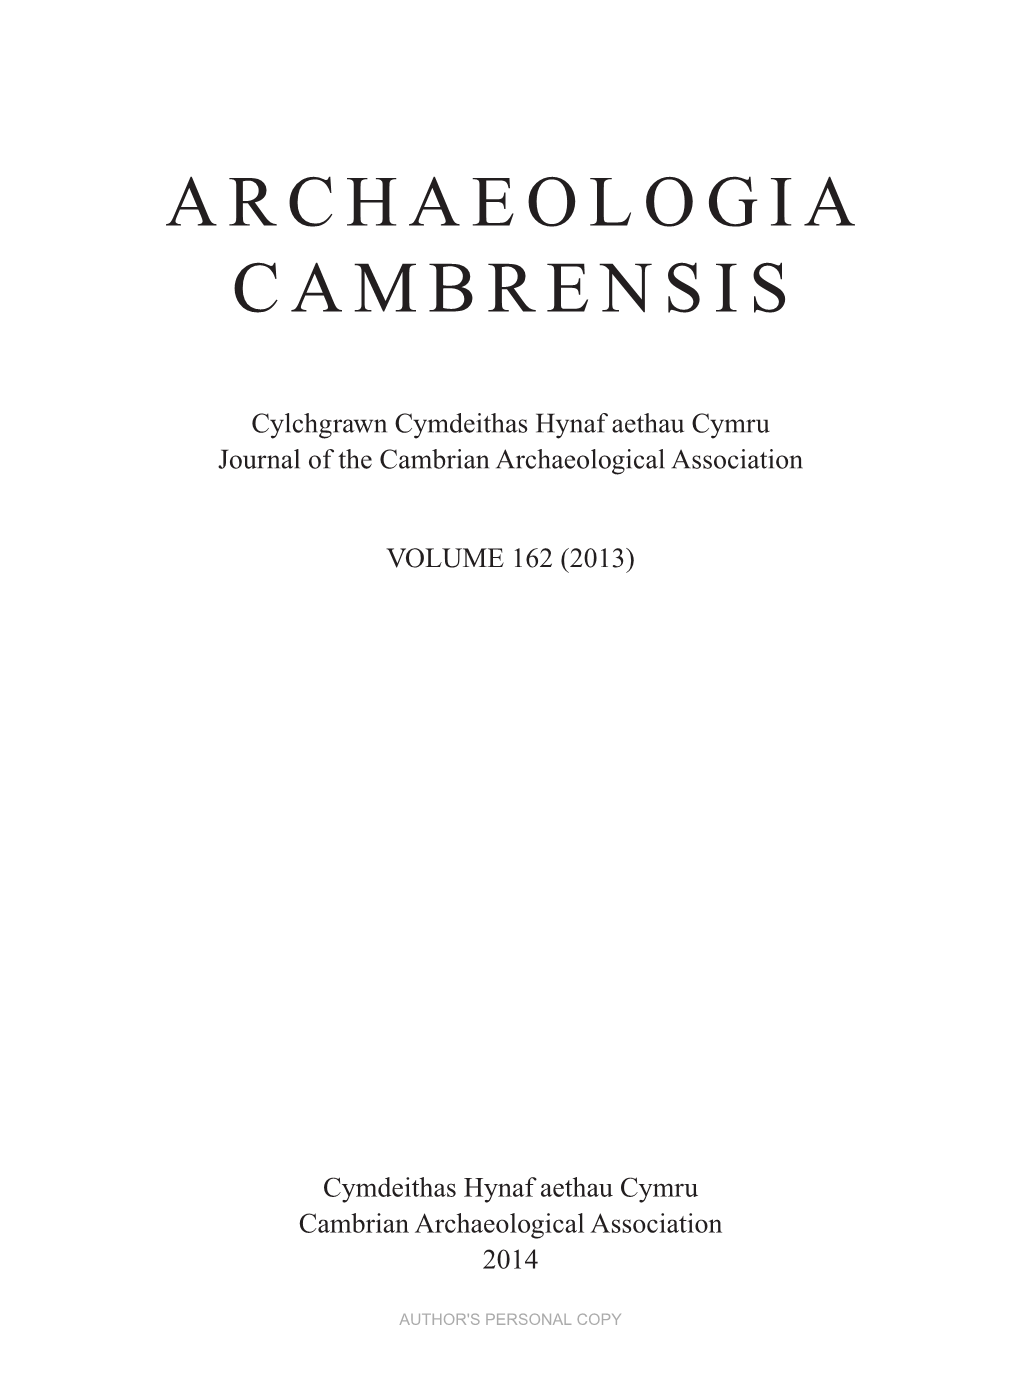 Archaeologia Cambrensis